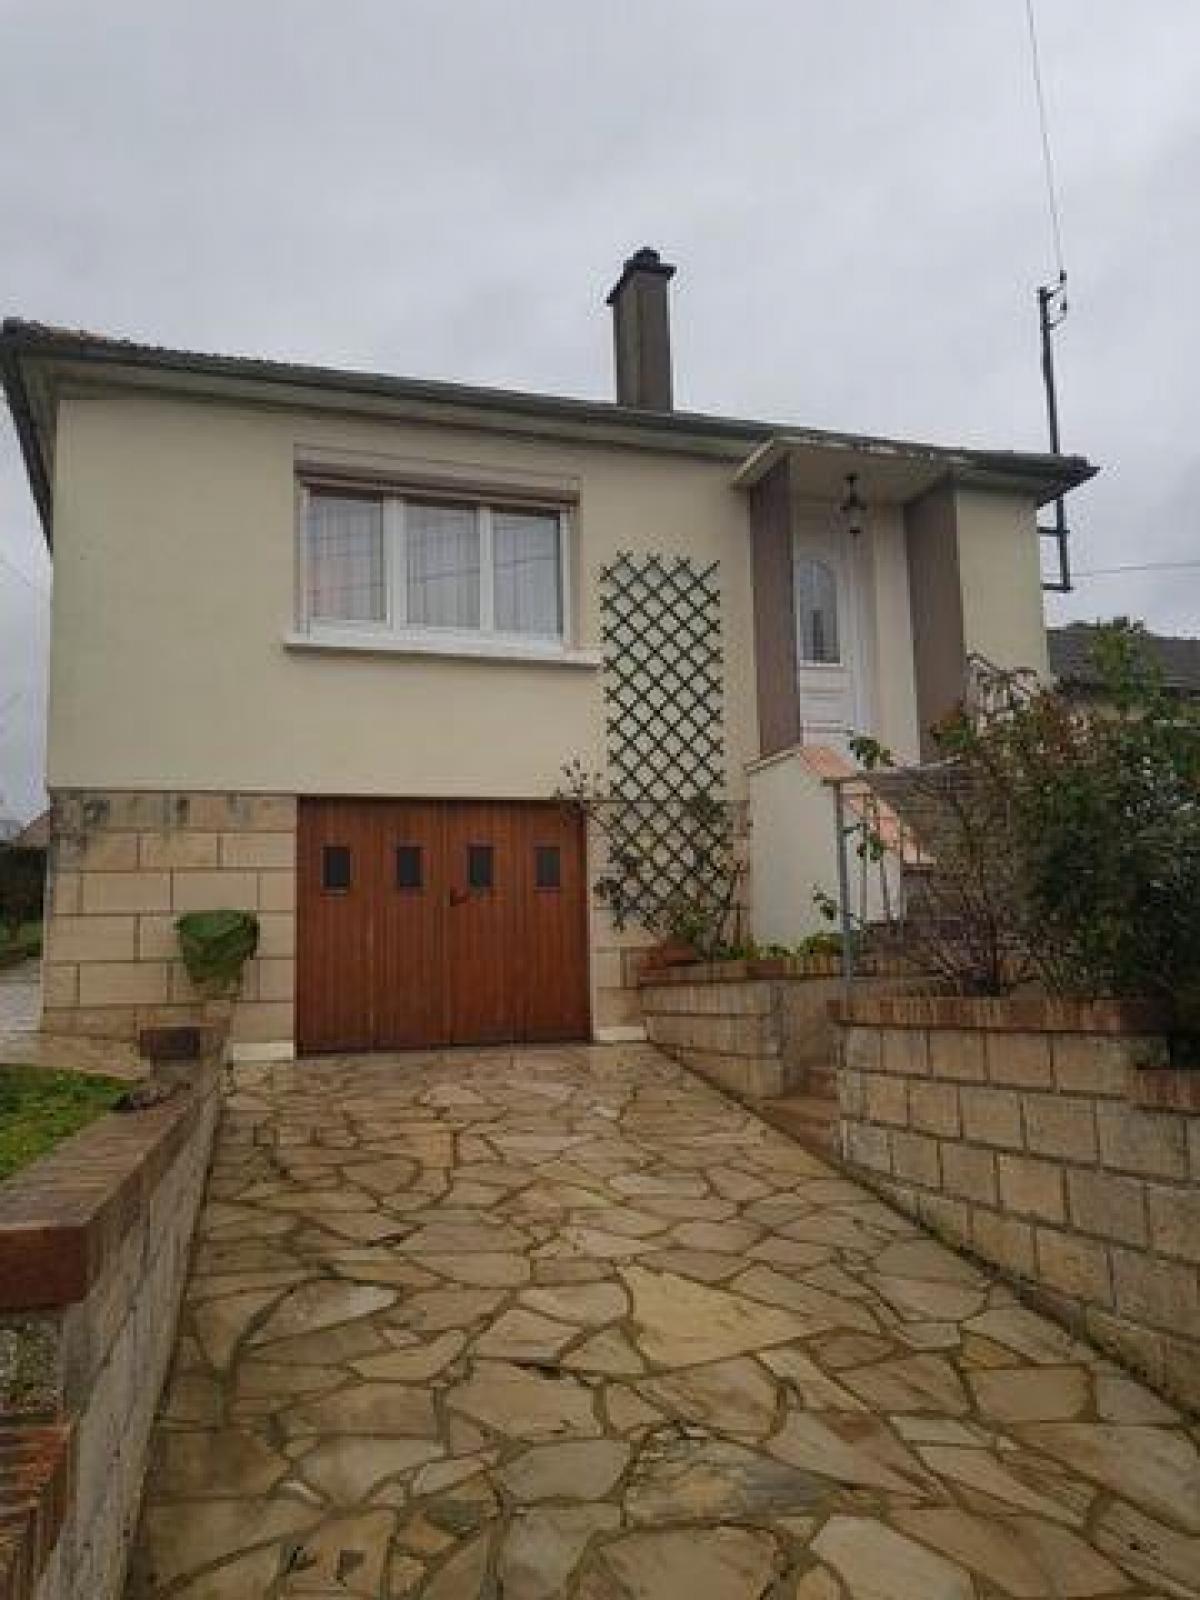 Picture of Home For Sale in Montataire, Picardie, France